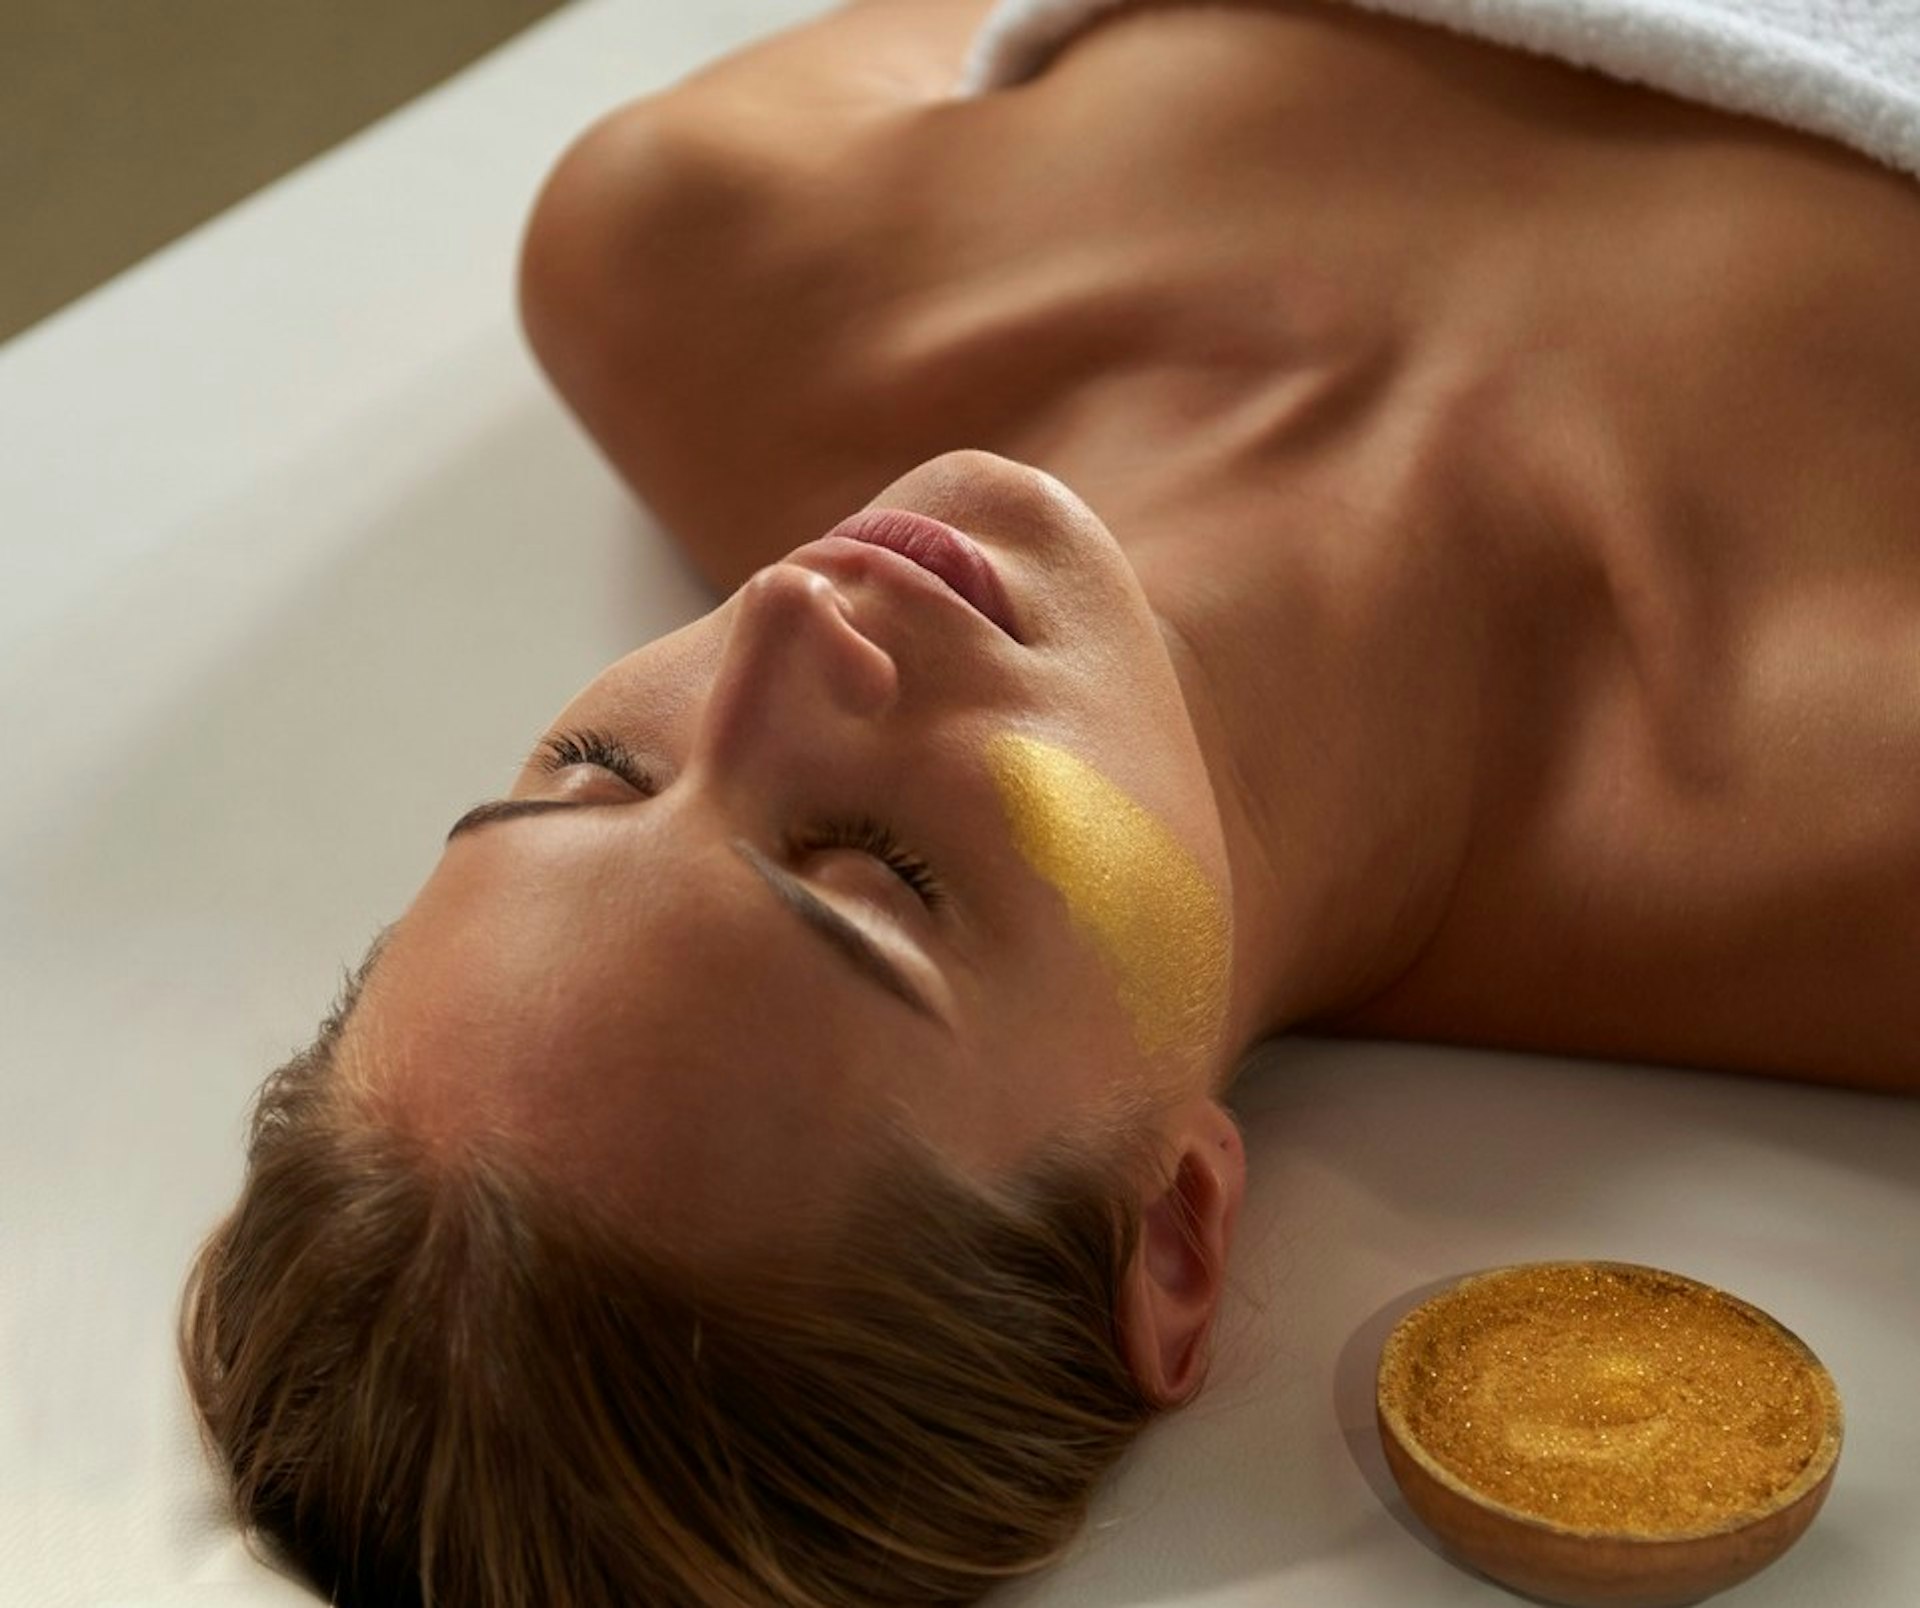 A woman enjoys a facial spa treatment with a cream that is gold in colour.